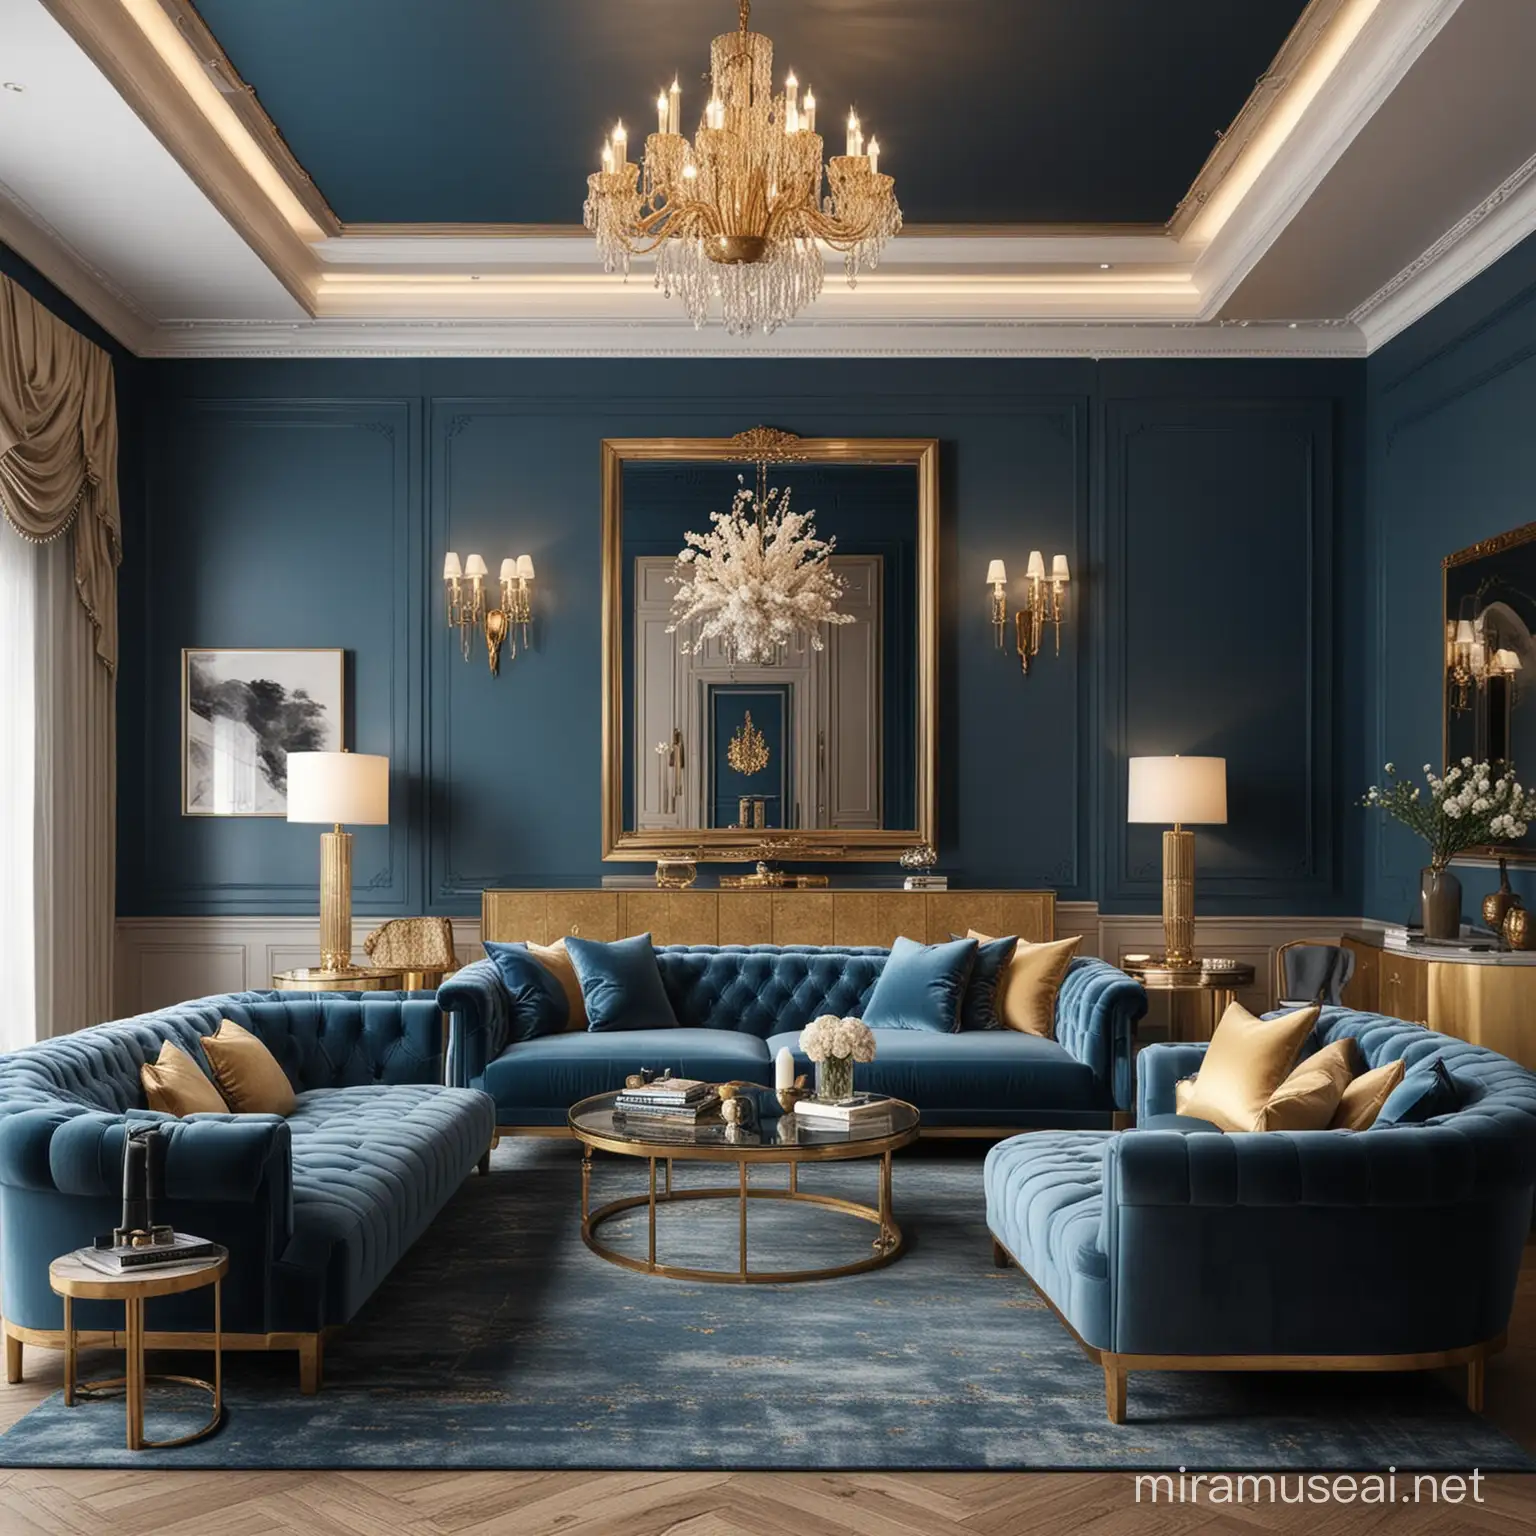 Modern Architectural Interior Design Elegant Living Room with Blue and Gold Accents